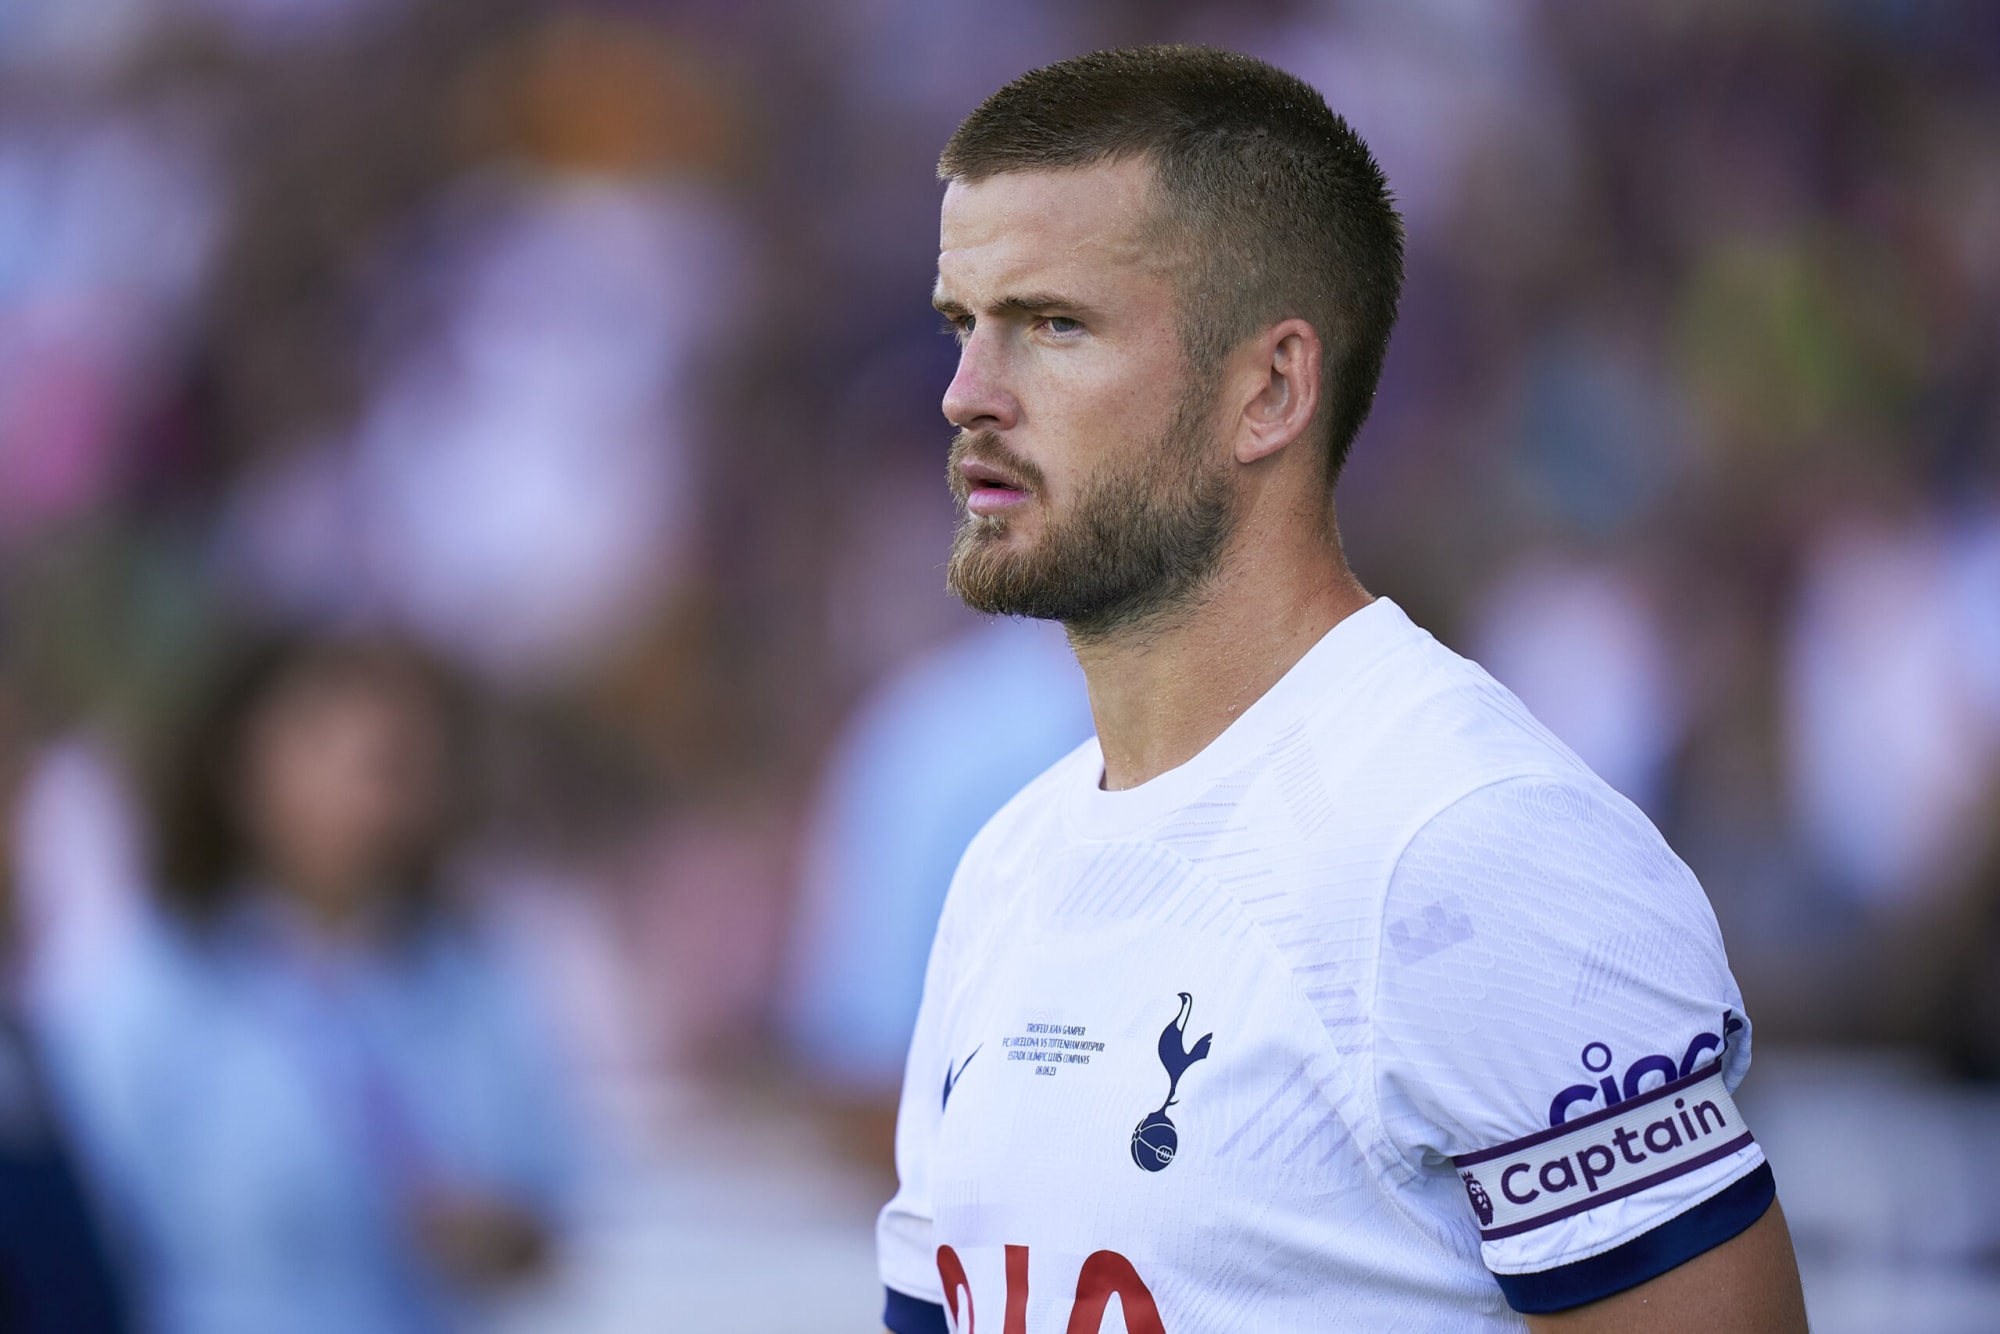 No truth to Eric Dier joining Saudi club Al-Nassr rumour, Gold confirms